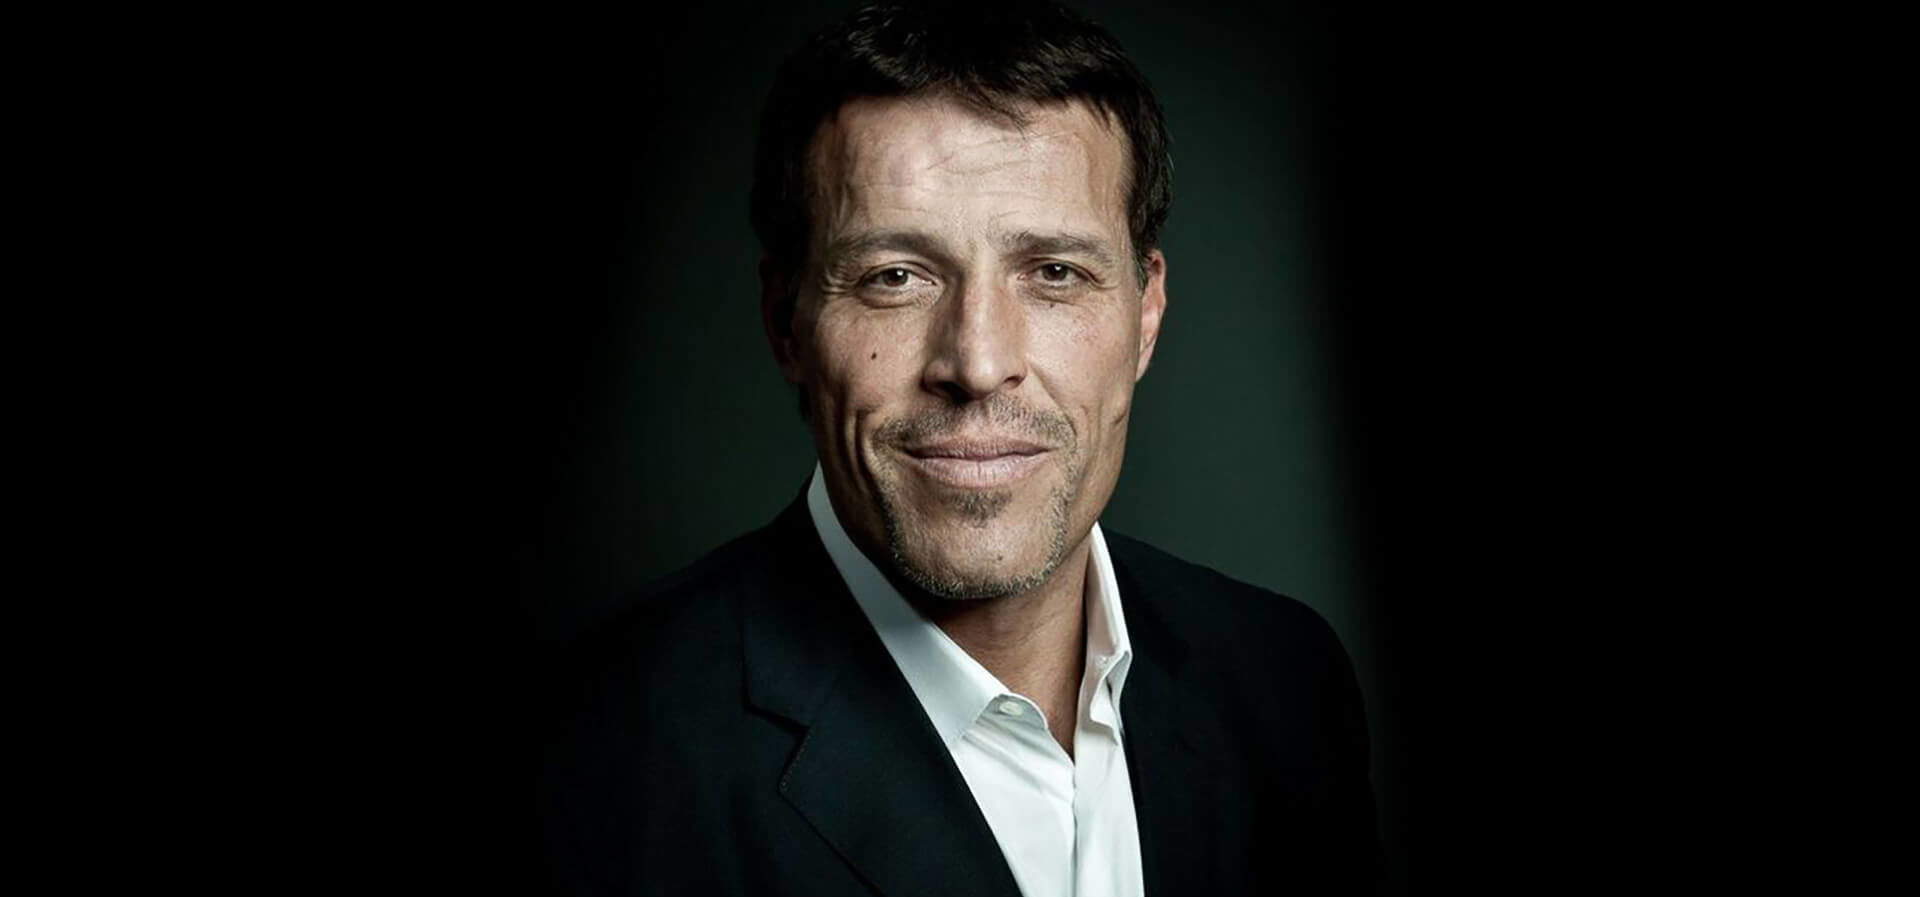 Tony Robbins On The Habits & Skills To Take Back
Control Of Your Life!